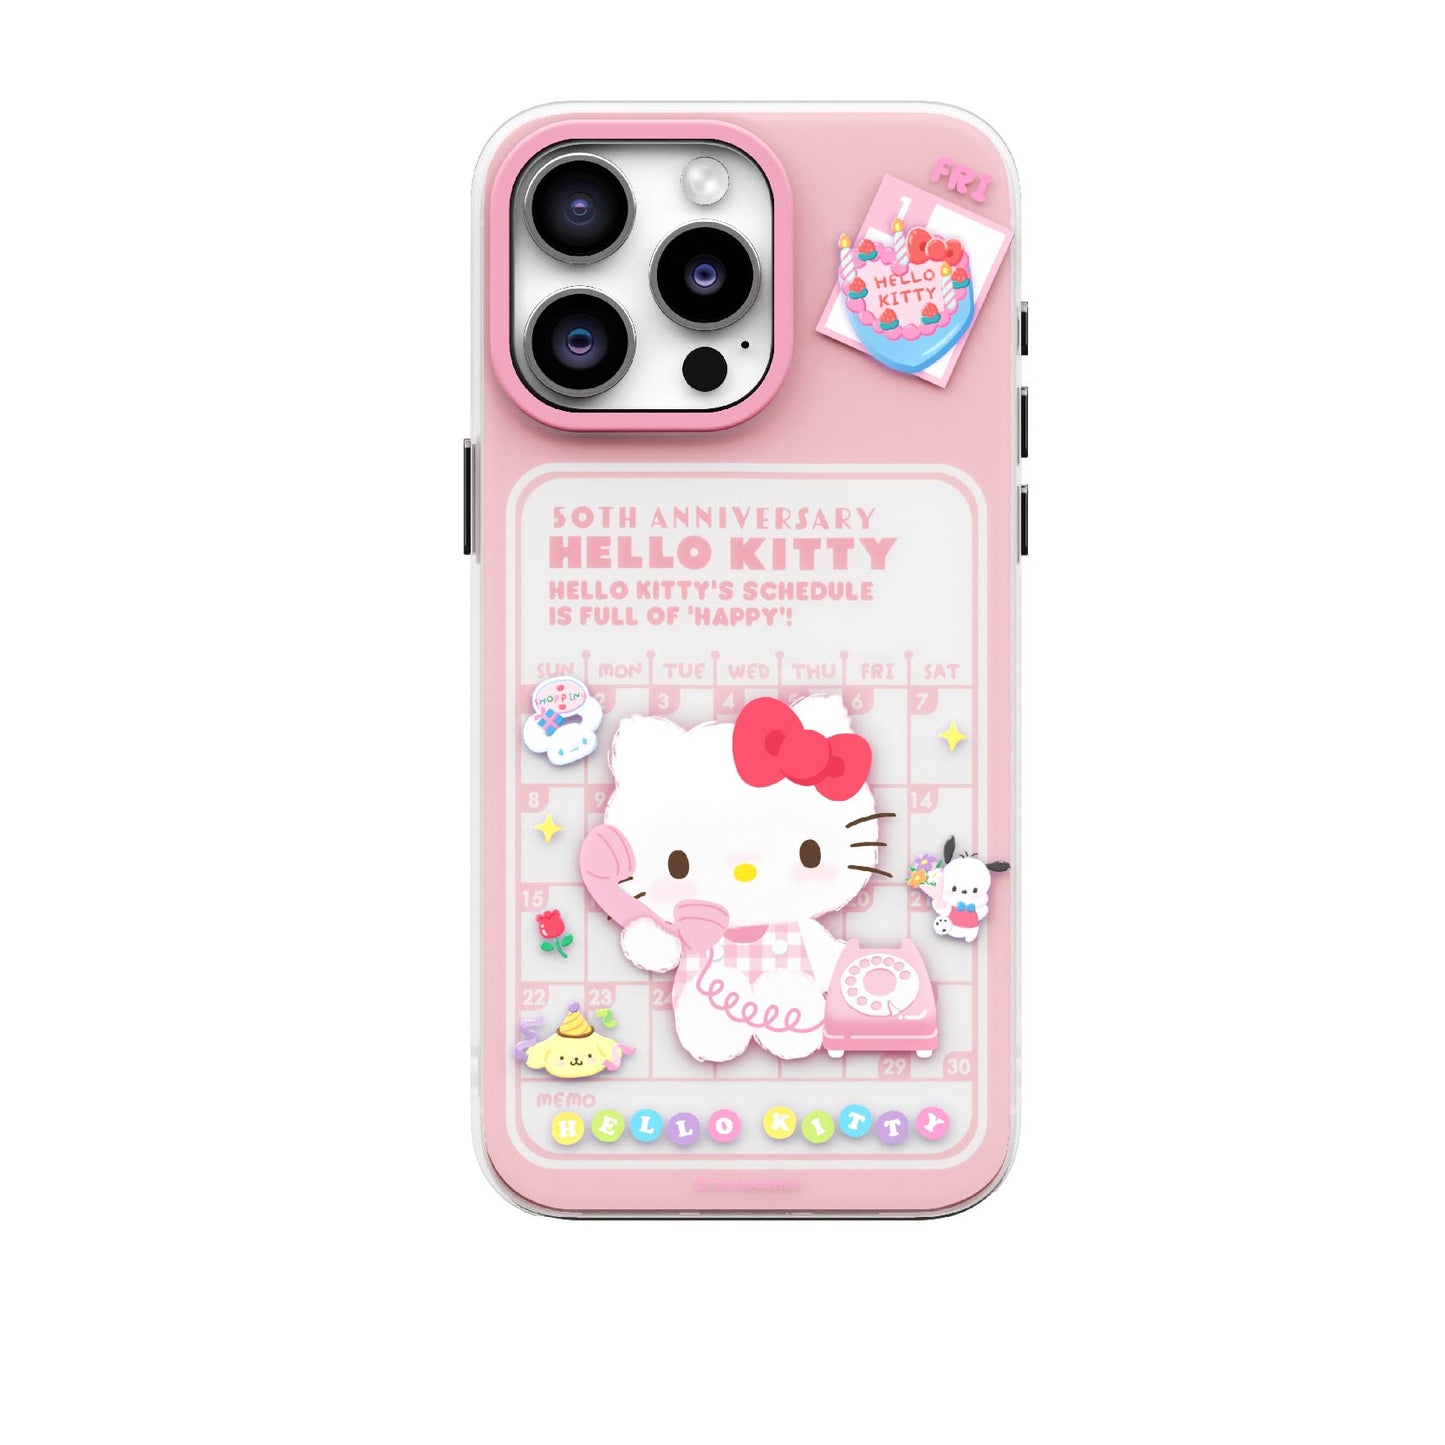 Sanrio Hello Kitty 50th Anniversary Datebook Anti-Scratch Shockproof Back Cover Case